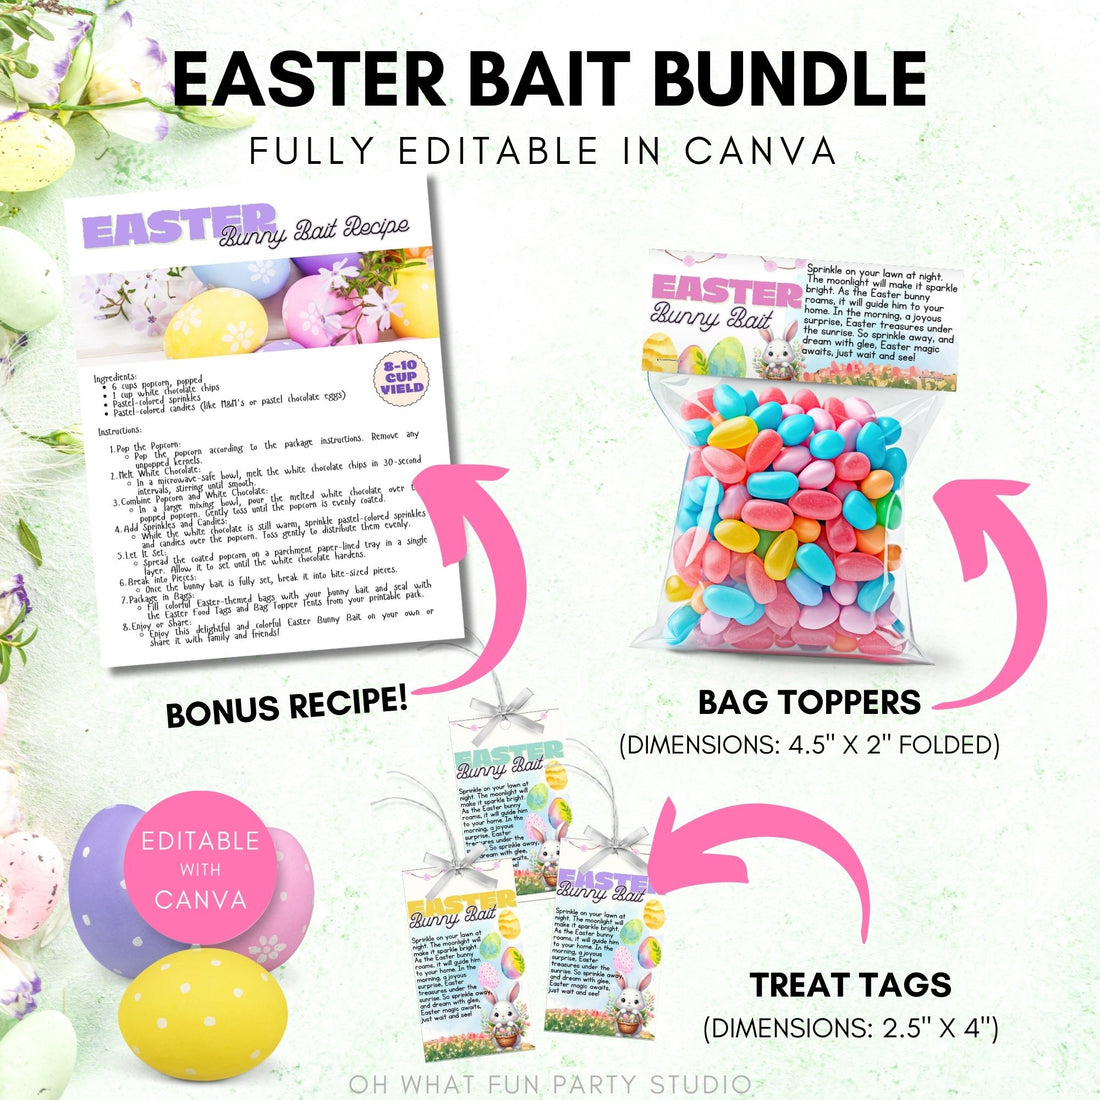 Welcome to the sweetest Easter treat adventure with our Printable Bunny Bait Bag Topper Bundle! This bundle includes everything you need to sprinkle some magic into your Easter celebrations. Inside this bundle, you&